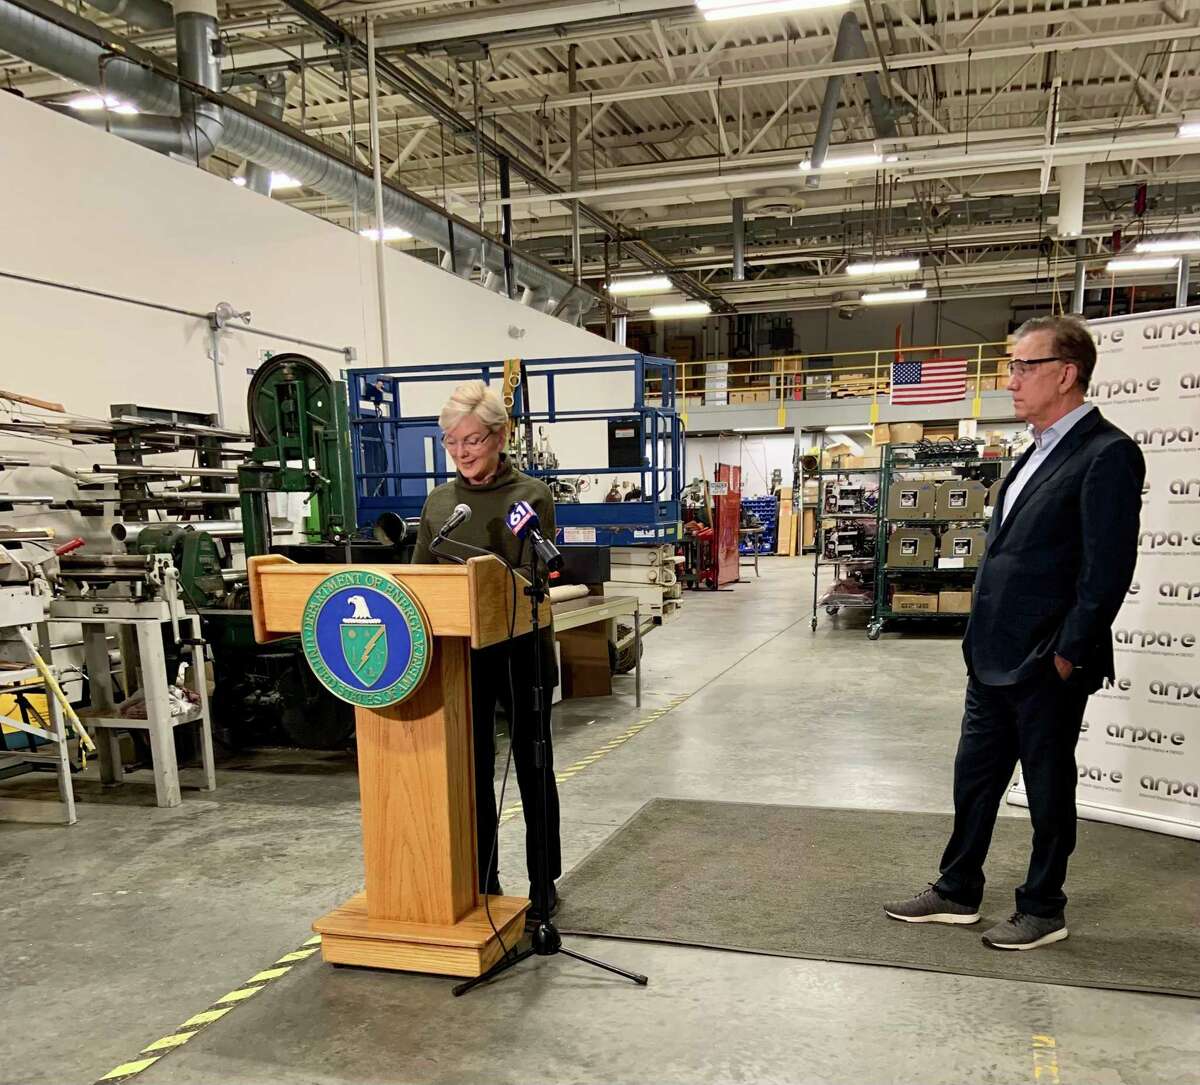 U.S. Secretary of Energy Jennifer M. Granholm speaks about a new grant to reduce greenhouse emissions in the gas, oil and coal industries Thursday, Dec. 2, 2021, at Precision Combustion in North Haven, while Gov. Ned Lamont stands alongside.